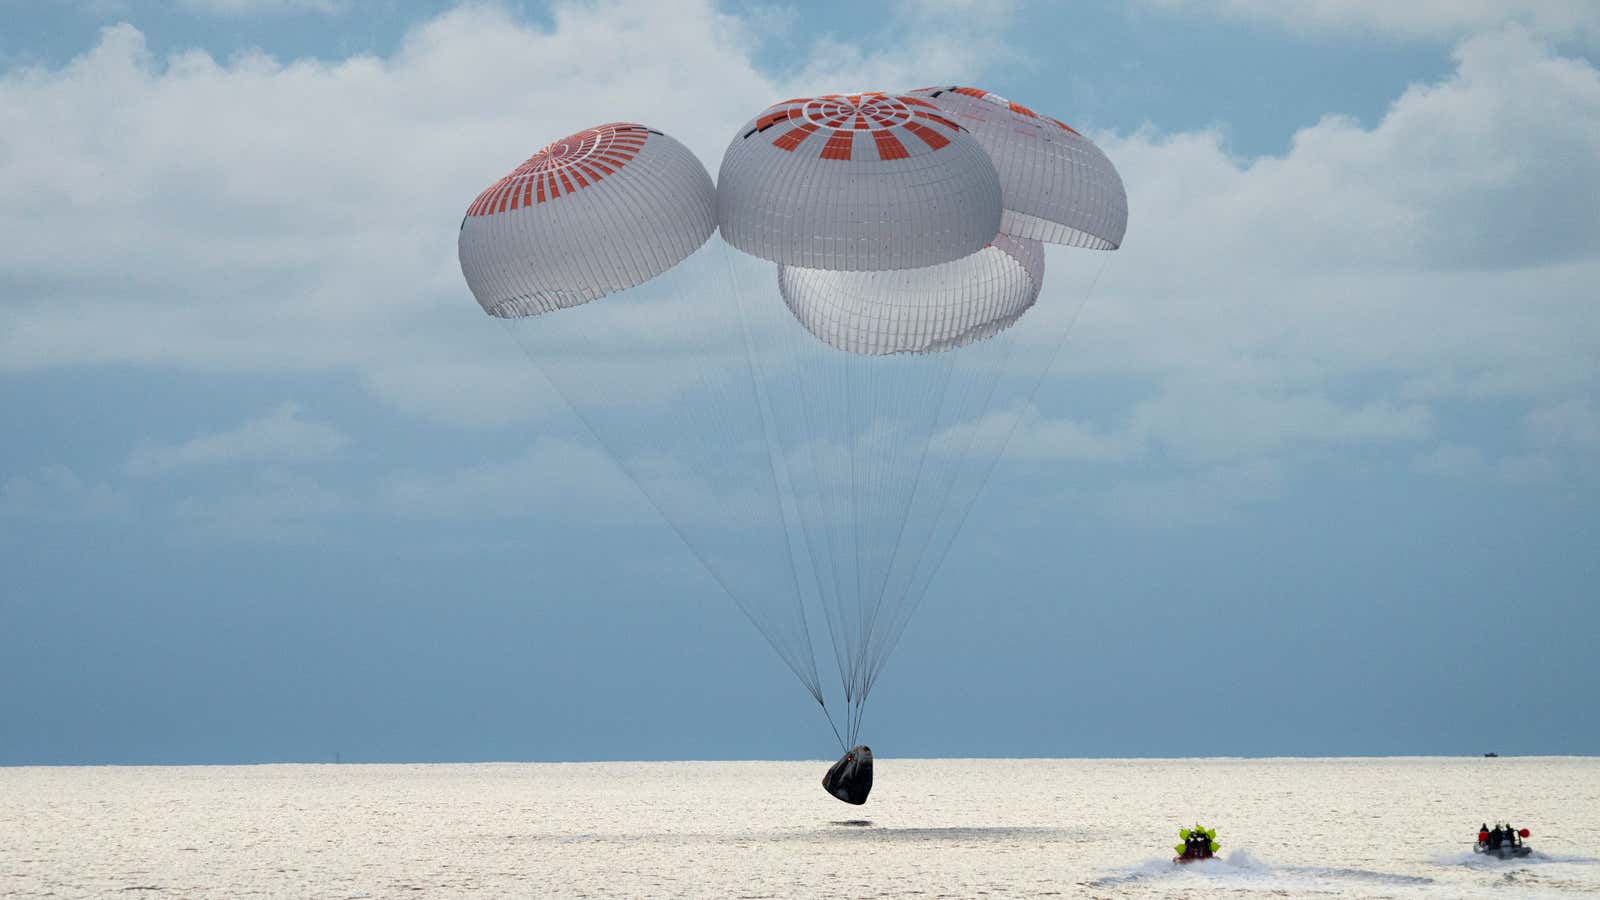 The Dragon capsule carrying four private passengers returns from orbit in September 2021.